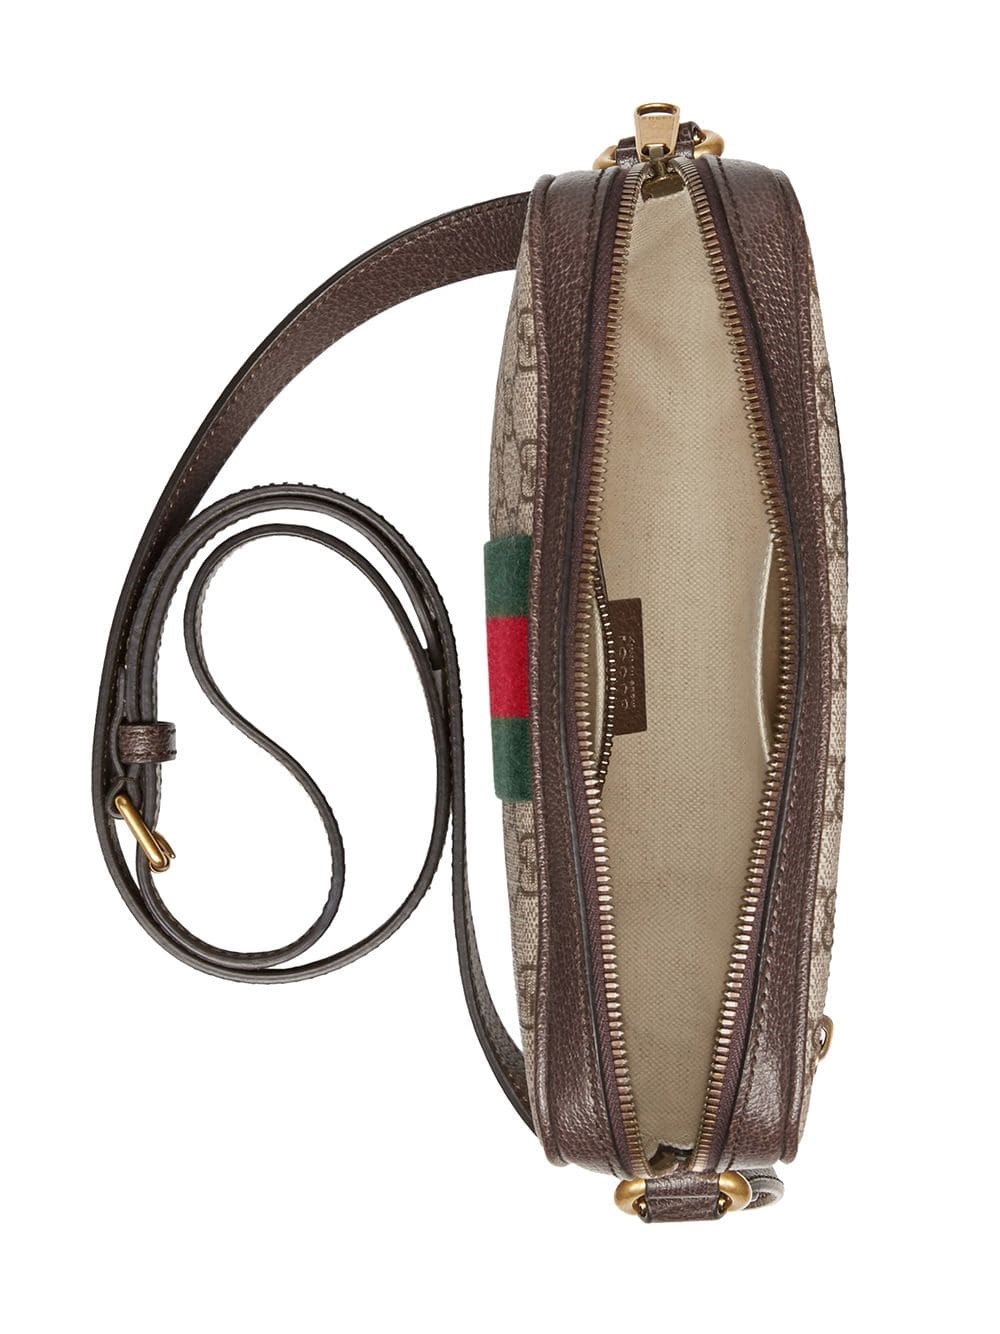 gucci GG PRINT CROSS BODY BAG available on wcy.wat.edu.pl - 26179